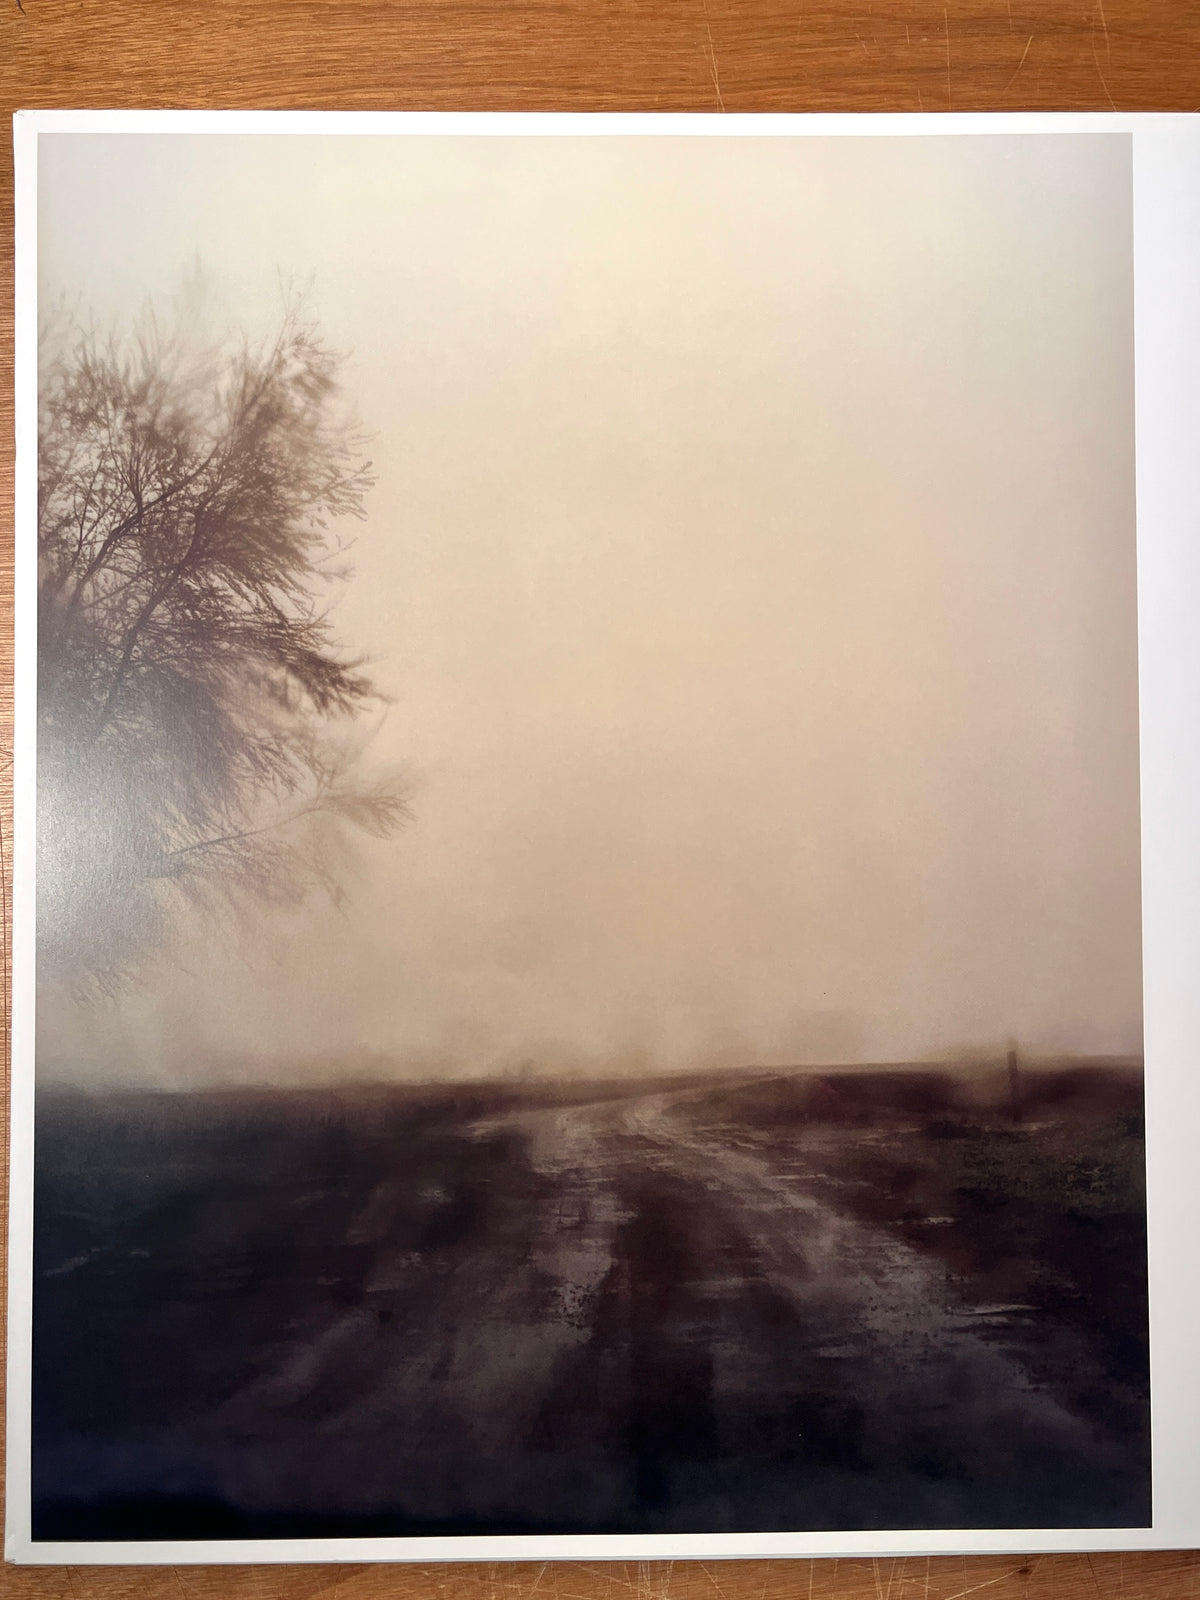 Todd Hido: A Road Divided, 2010, Nazraeli Press, Limited ed., SIGNED